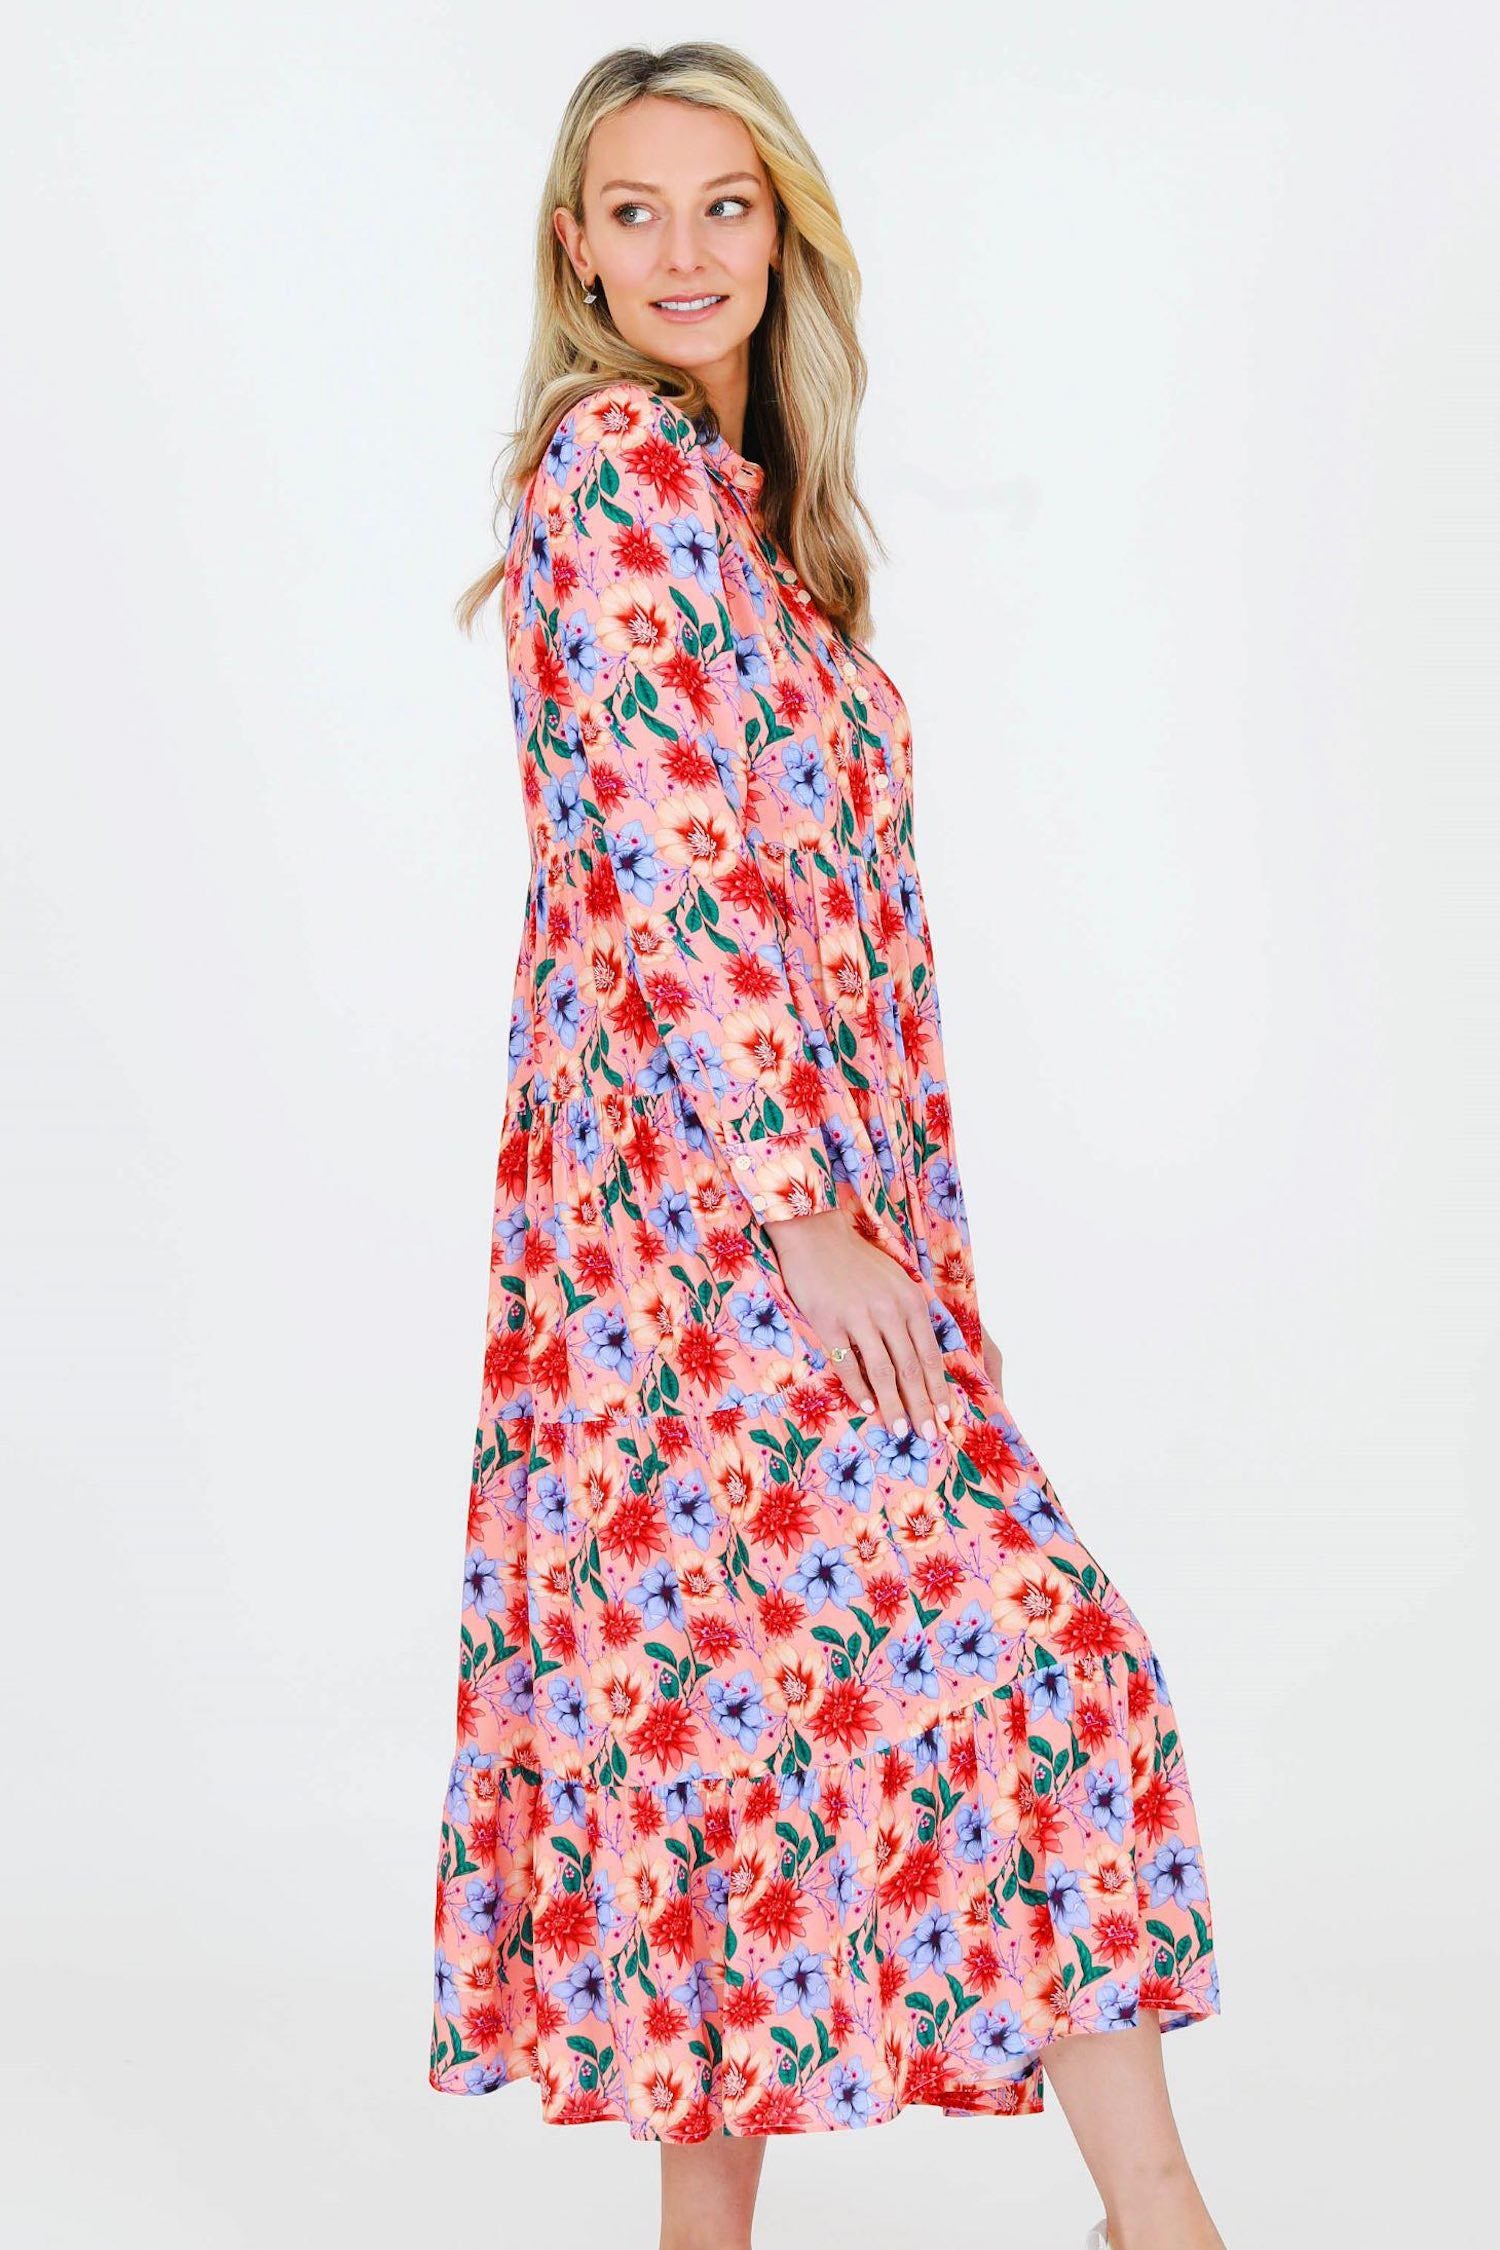 Long Sleeve Red Floral Maxi Dress